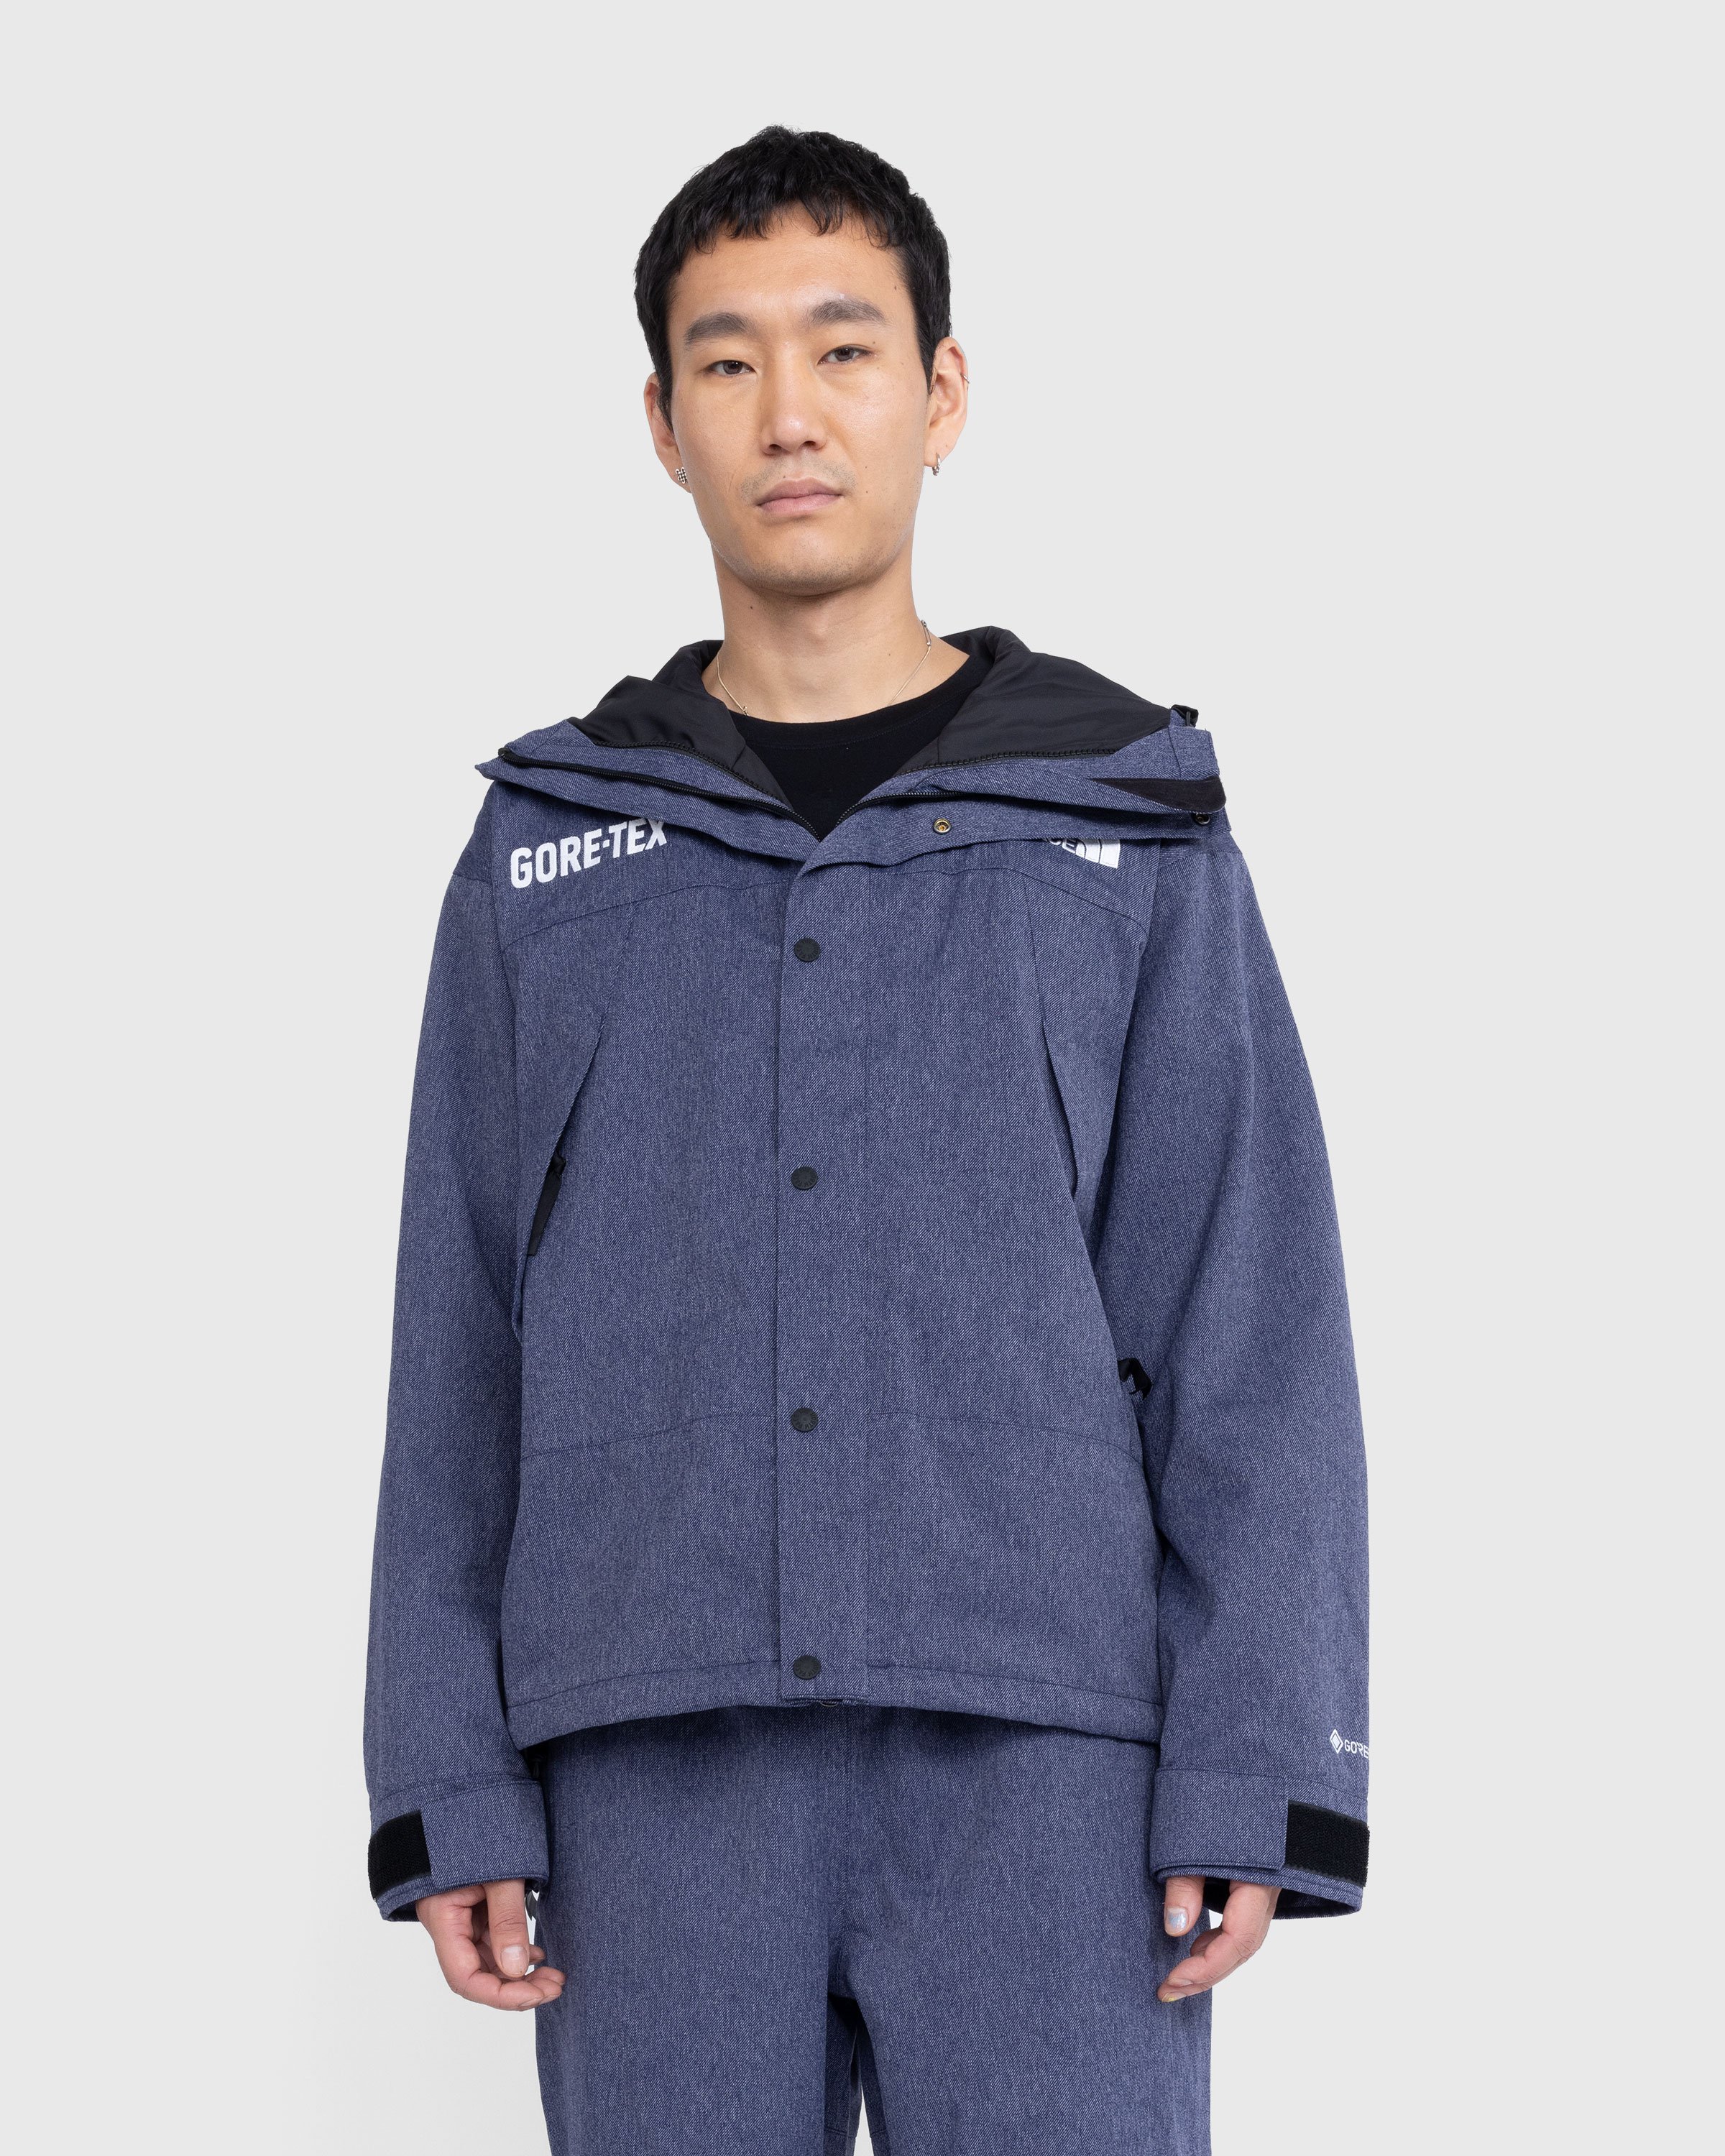 The North Face - GORE-TEX Mountain Jacket Denim Blue/TNF Black - Clothing - Blue - Image 4